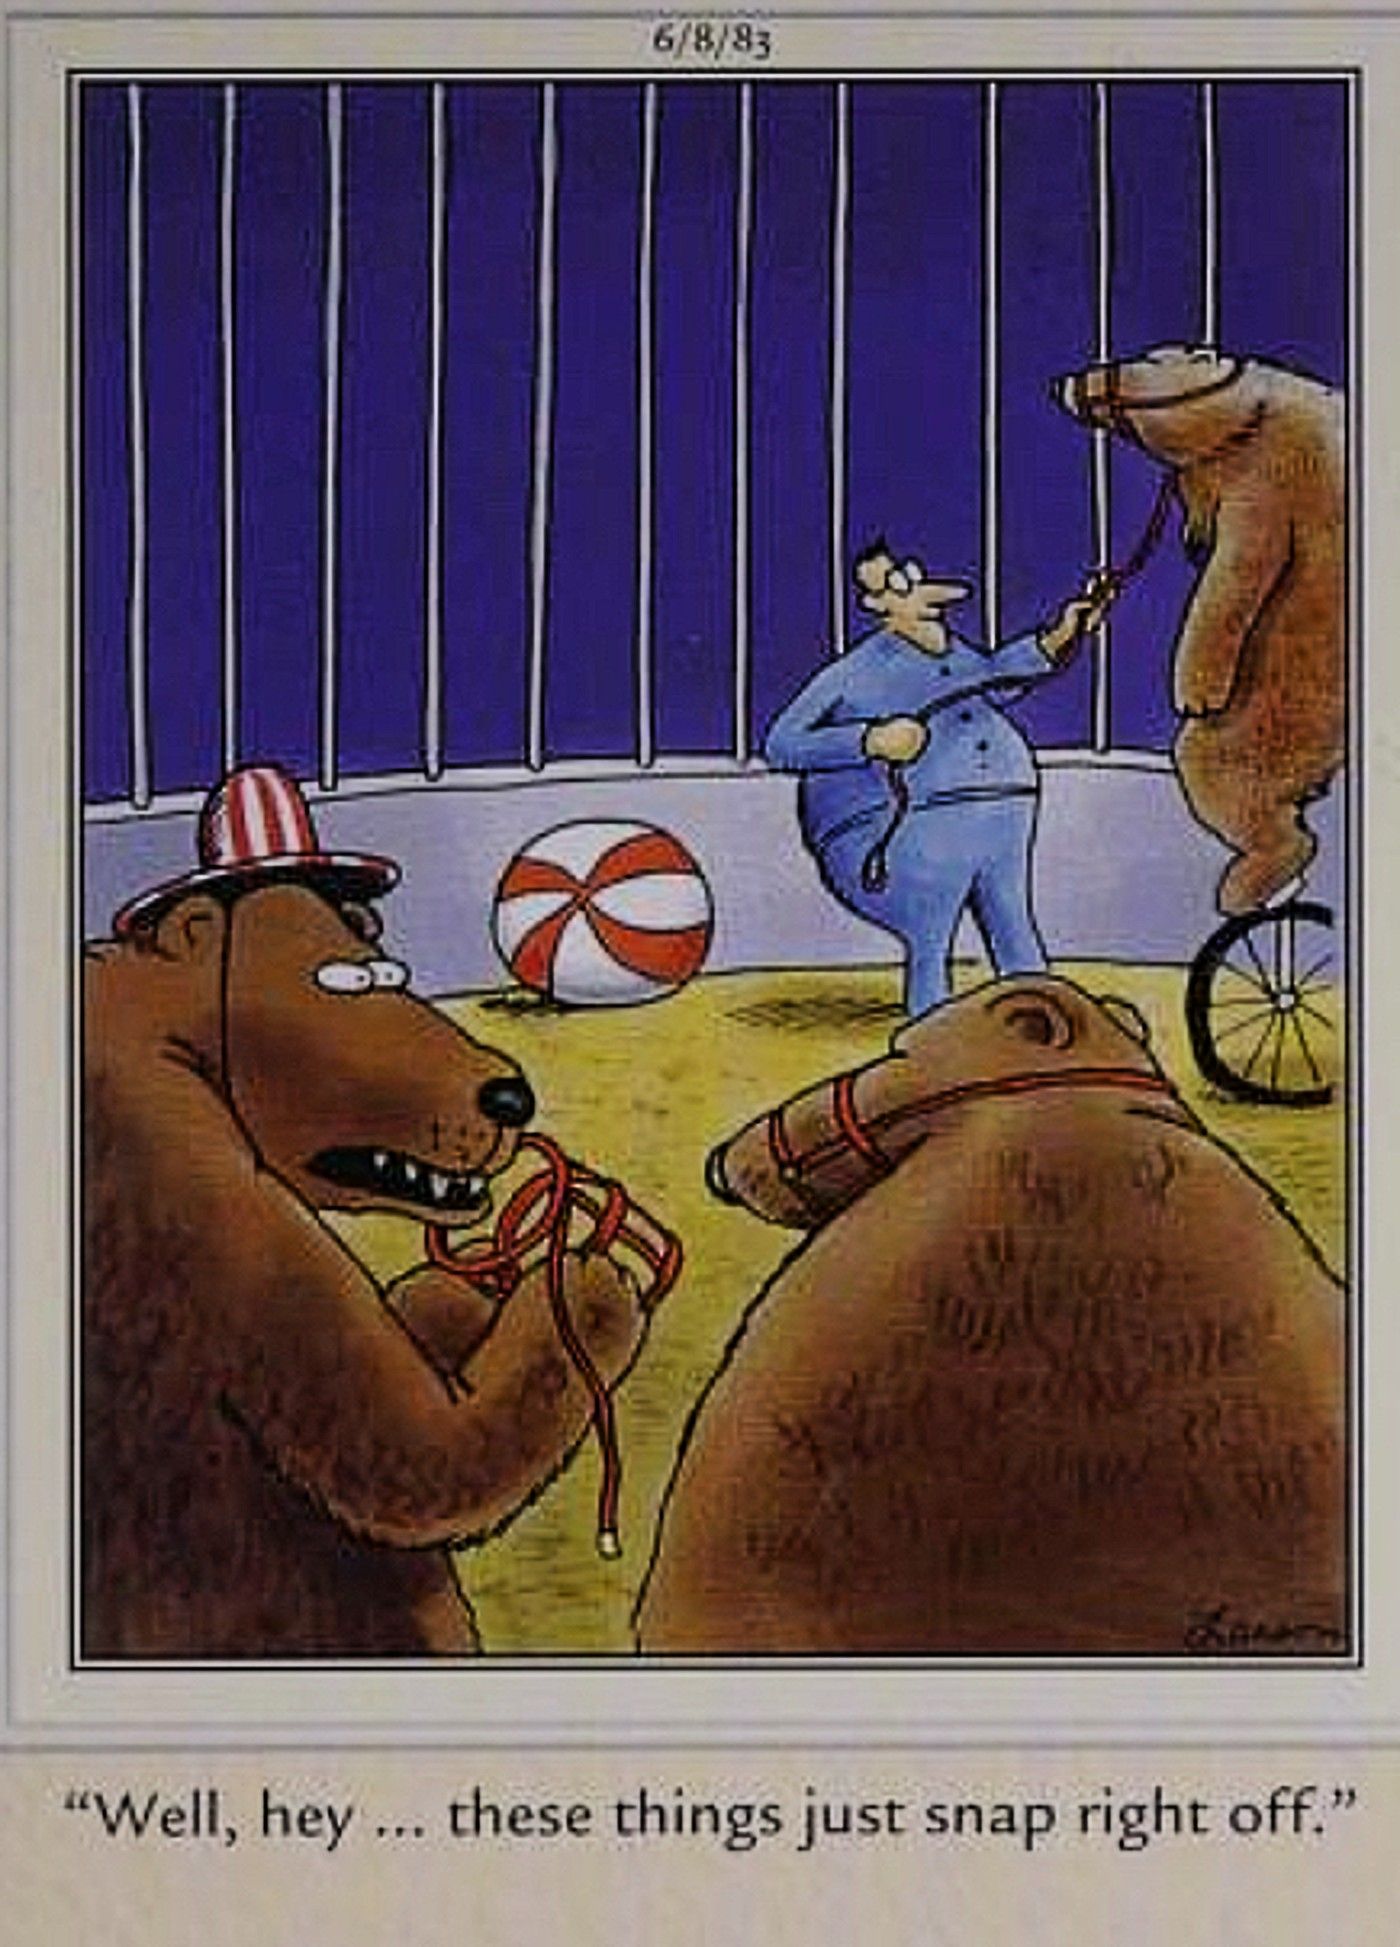 Far Side, circus bears realize their muzzles slip right off